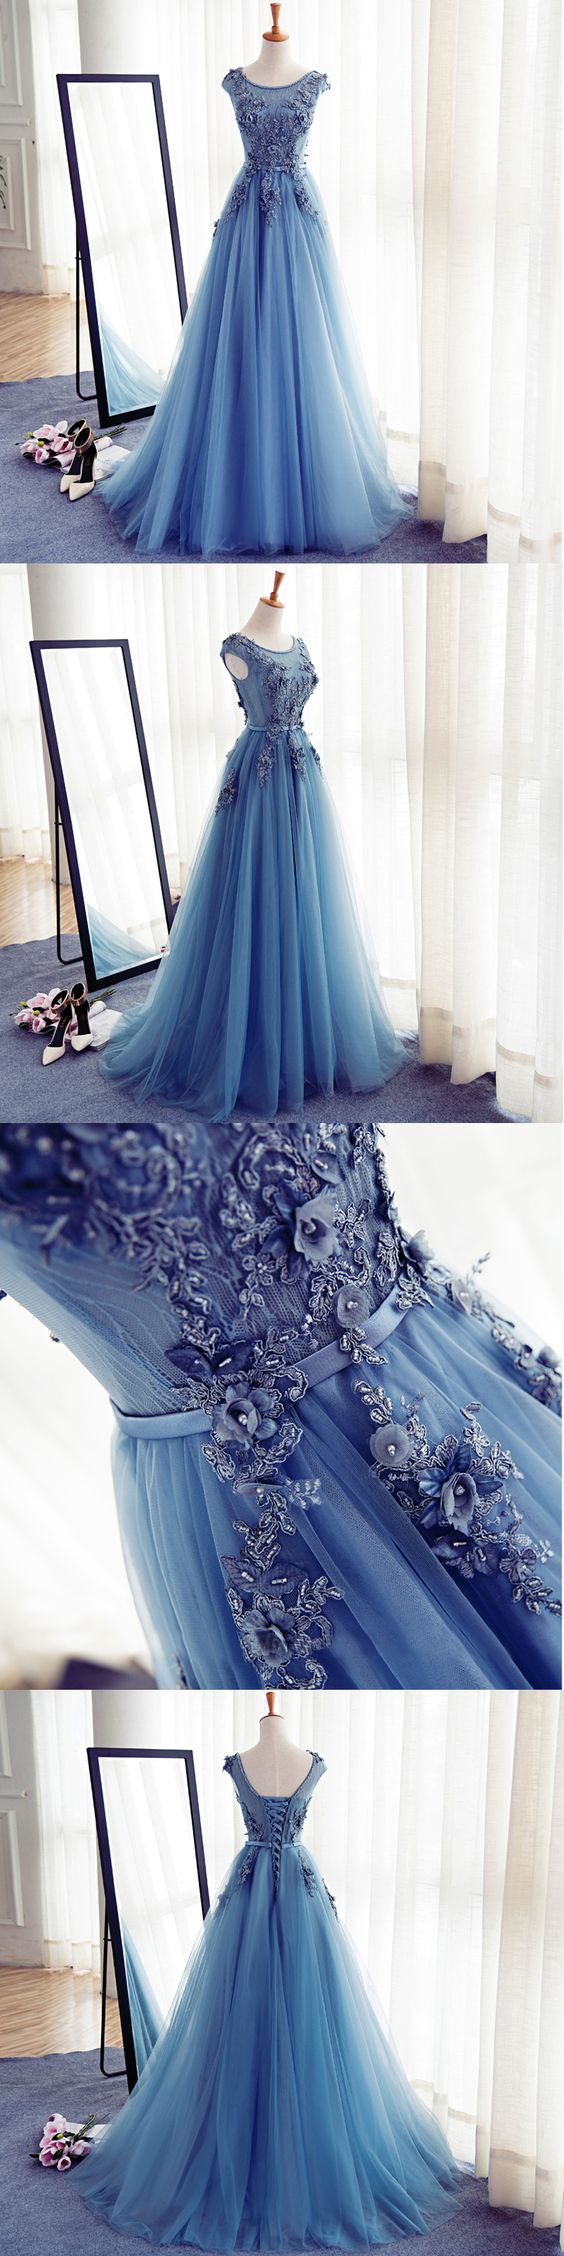 Cap Sleeve Blue Lace Beaded Evening A Line Prom Dresses, Long Sexy Party Prom Dress, Custom Long Prom Dresses, Formal Prom Dresses